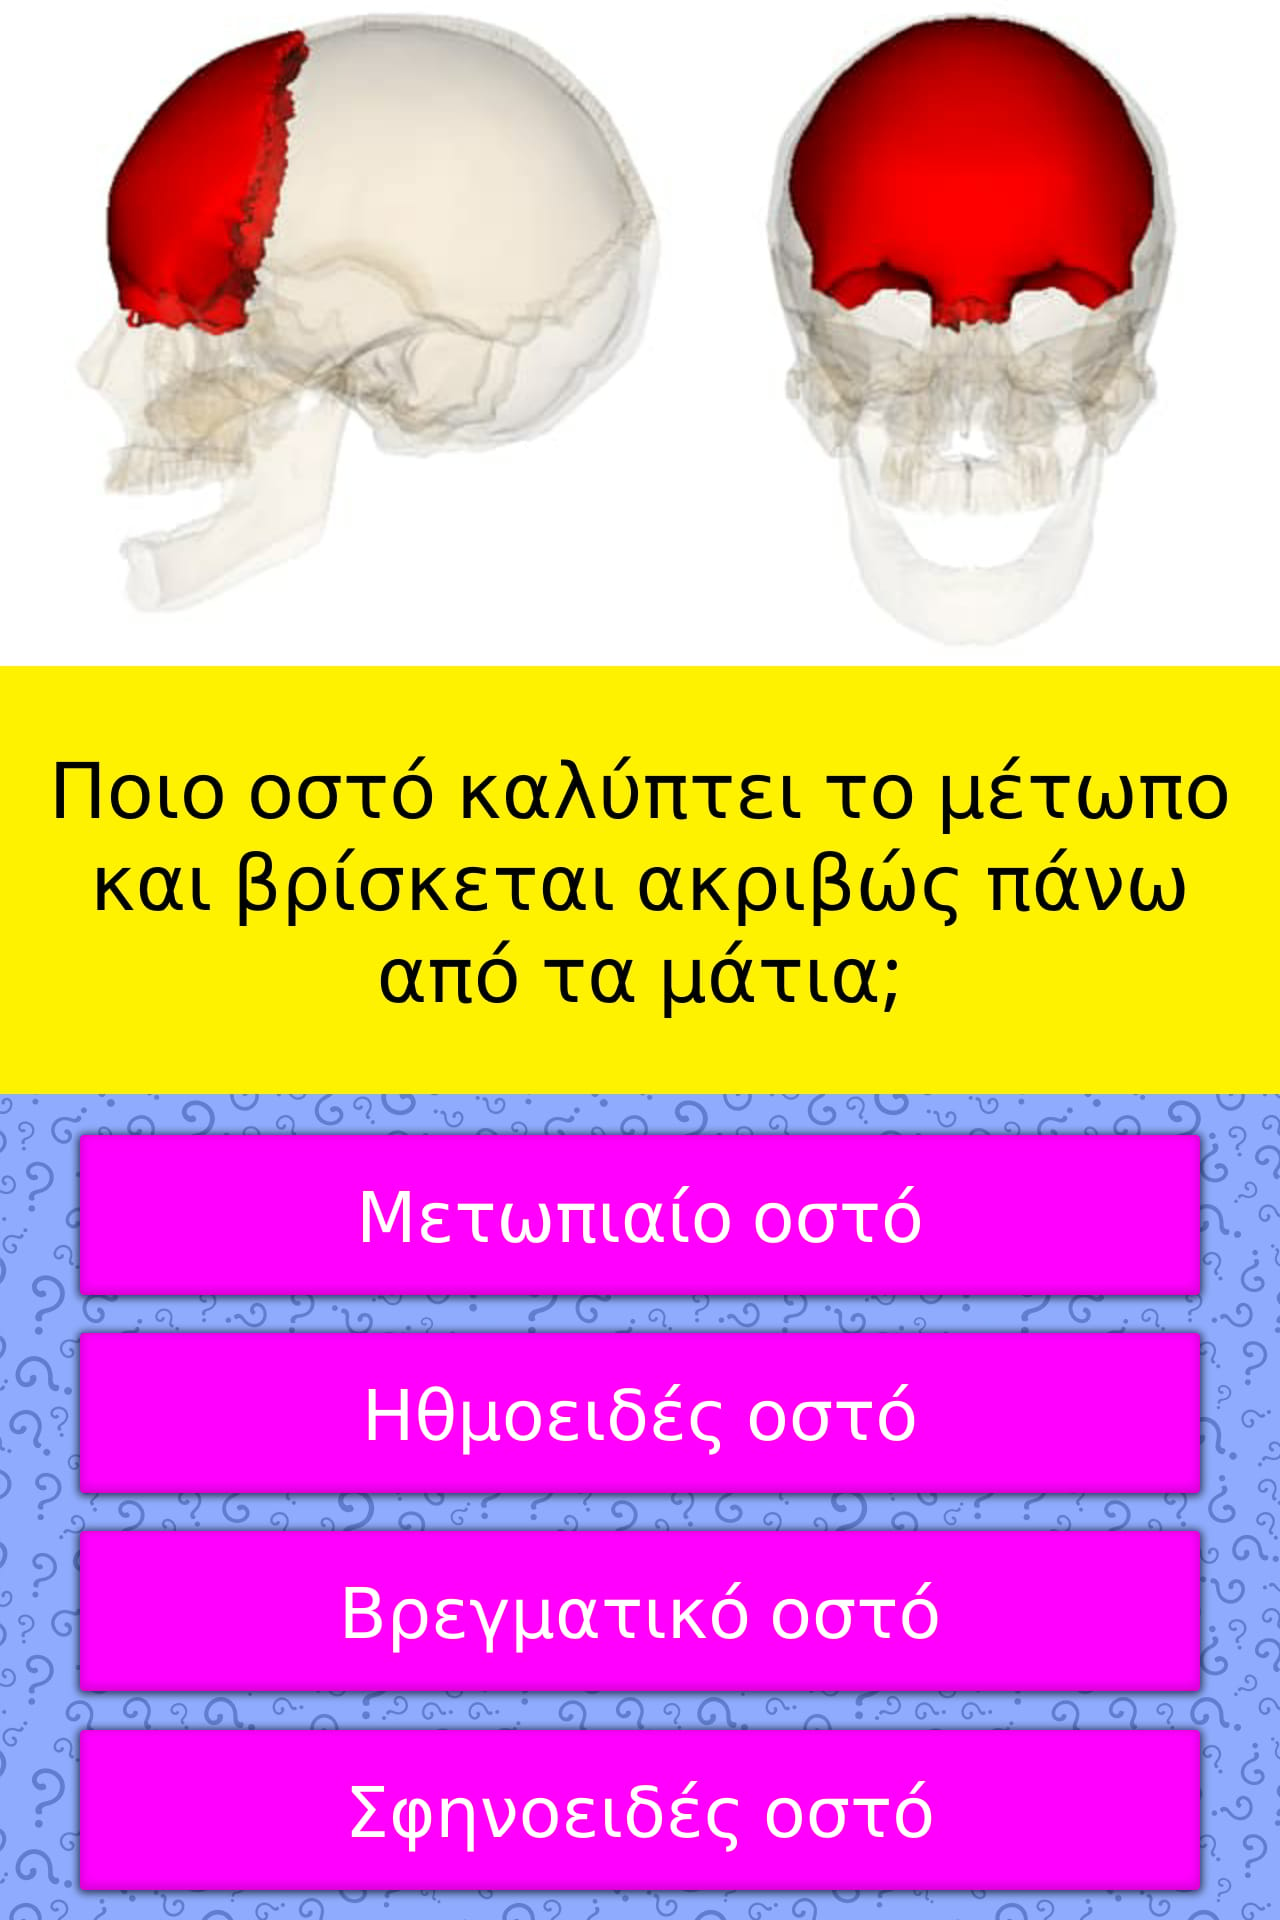 Which bone covers the forehead and... | Trivia Answers | QuizzClub